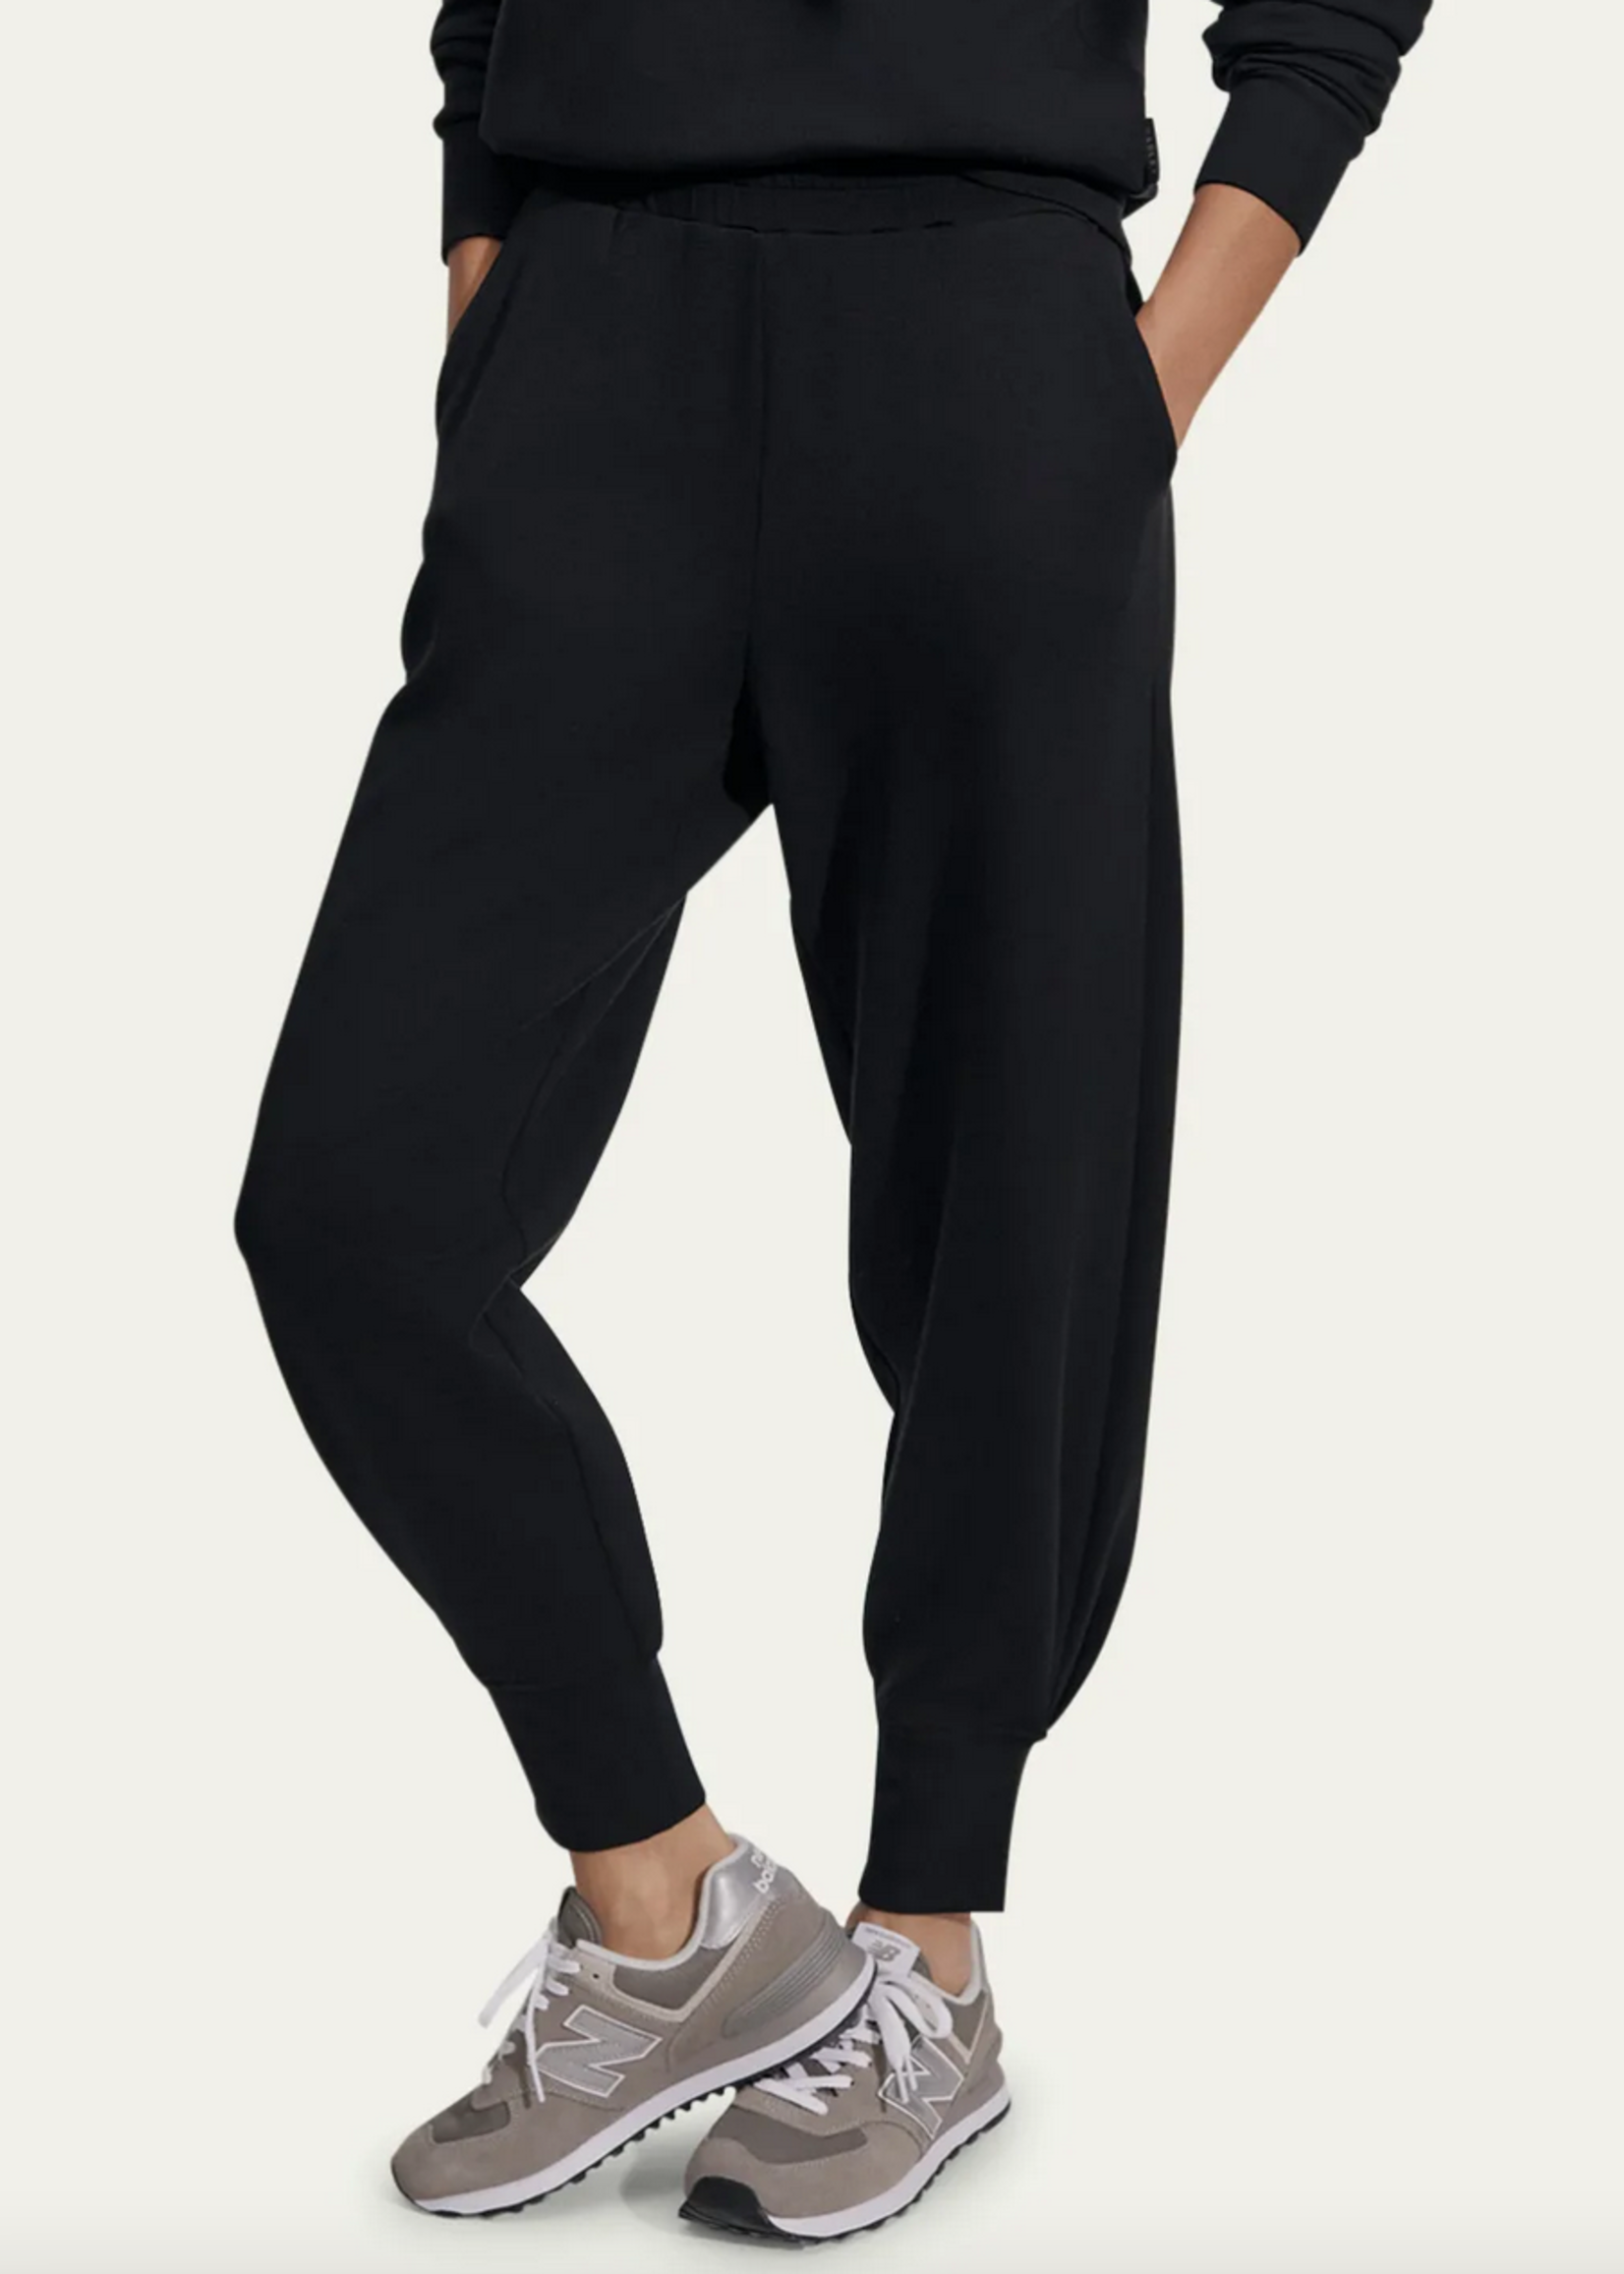 Varley Hyde Relaxed Cuffed Sweatpant- Black